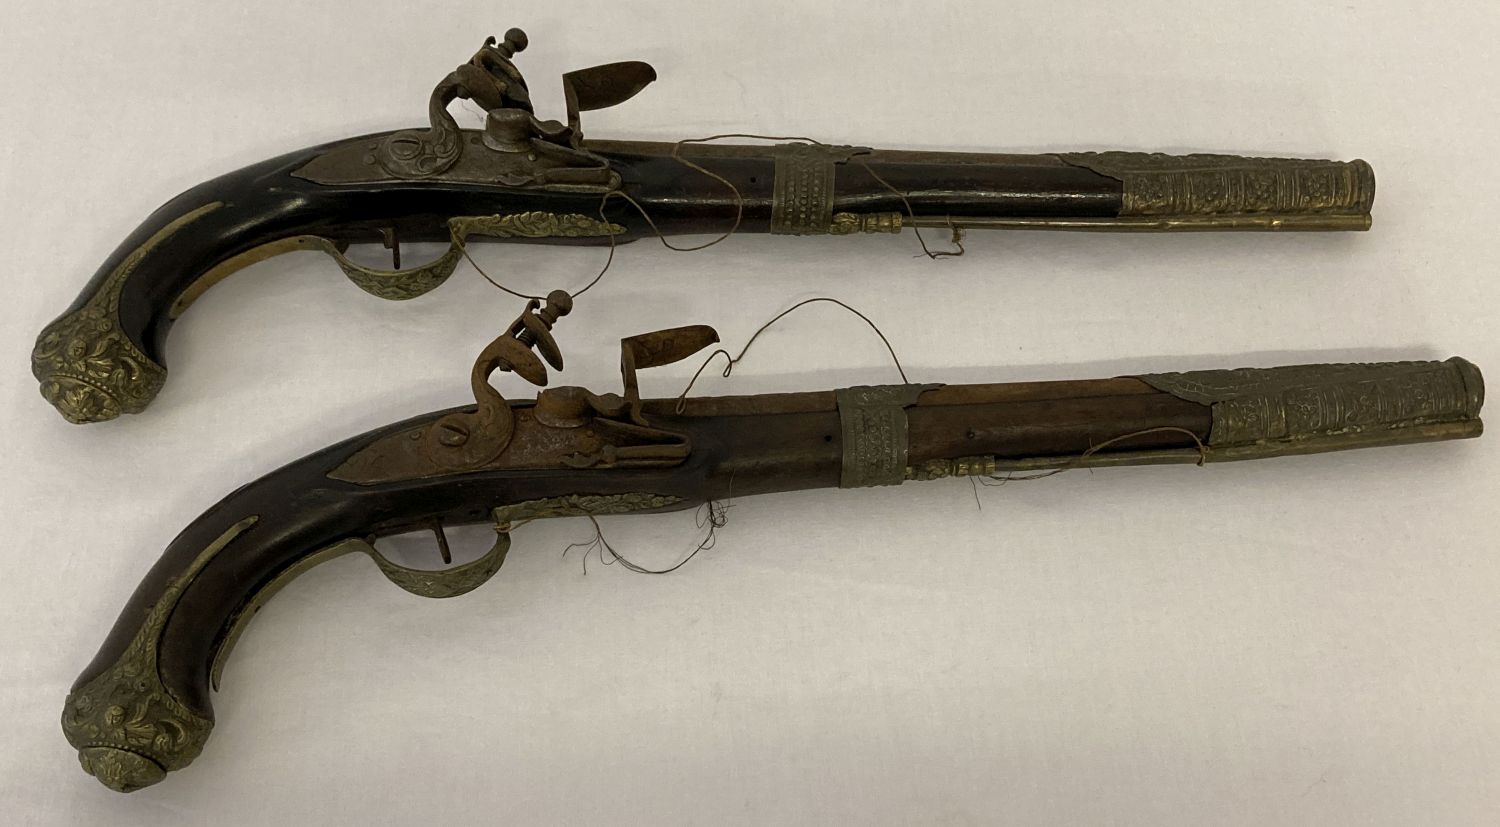 A pair of antique Middle Eastern brass framed flintlock pistols with ornate foliate designs.